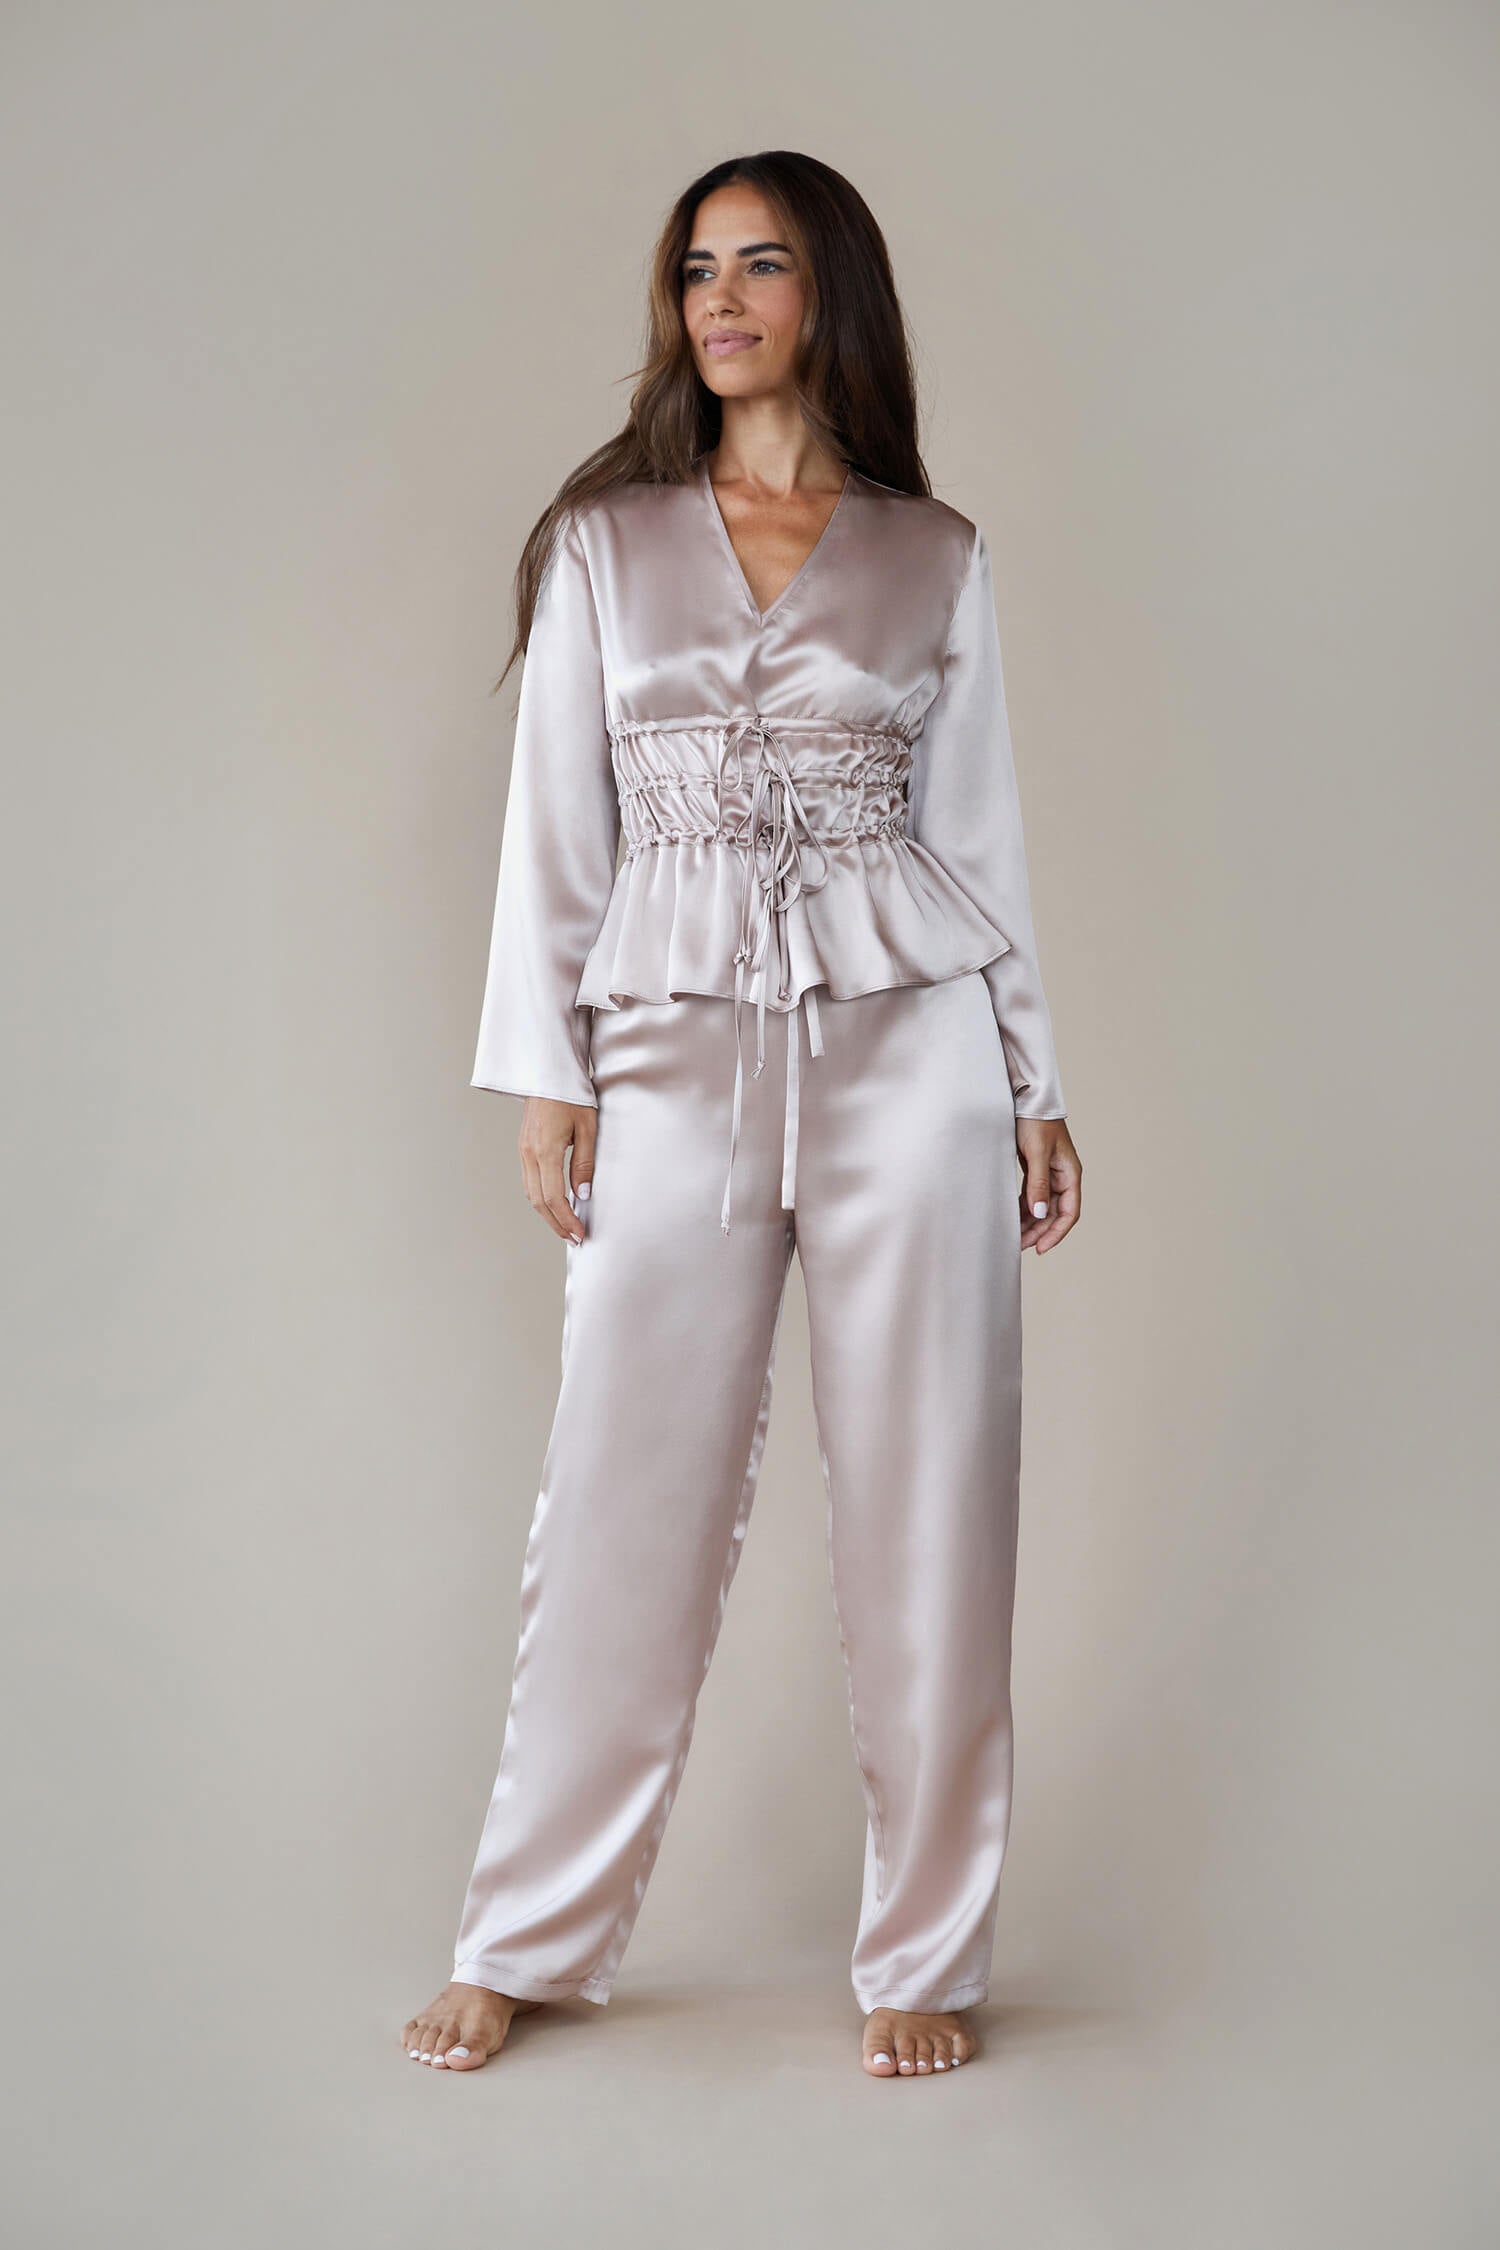 Model wears silk satin loungewear set in colour rose fawn. Her top is a long sleeved, V neck top with a corset style waist and she wears straight legged pyjama style silk trousers with a drawstring, elasticated waist. 